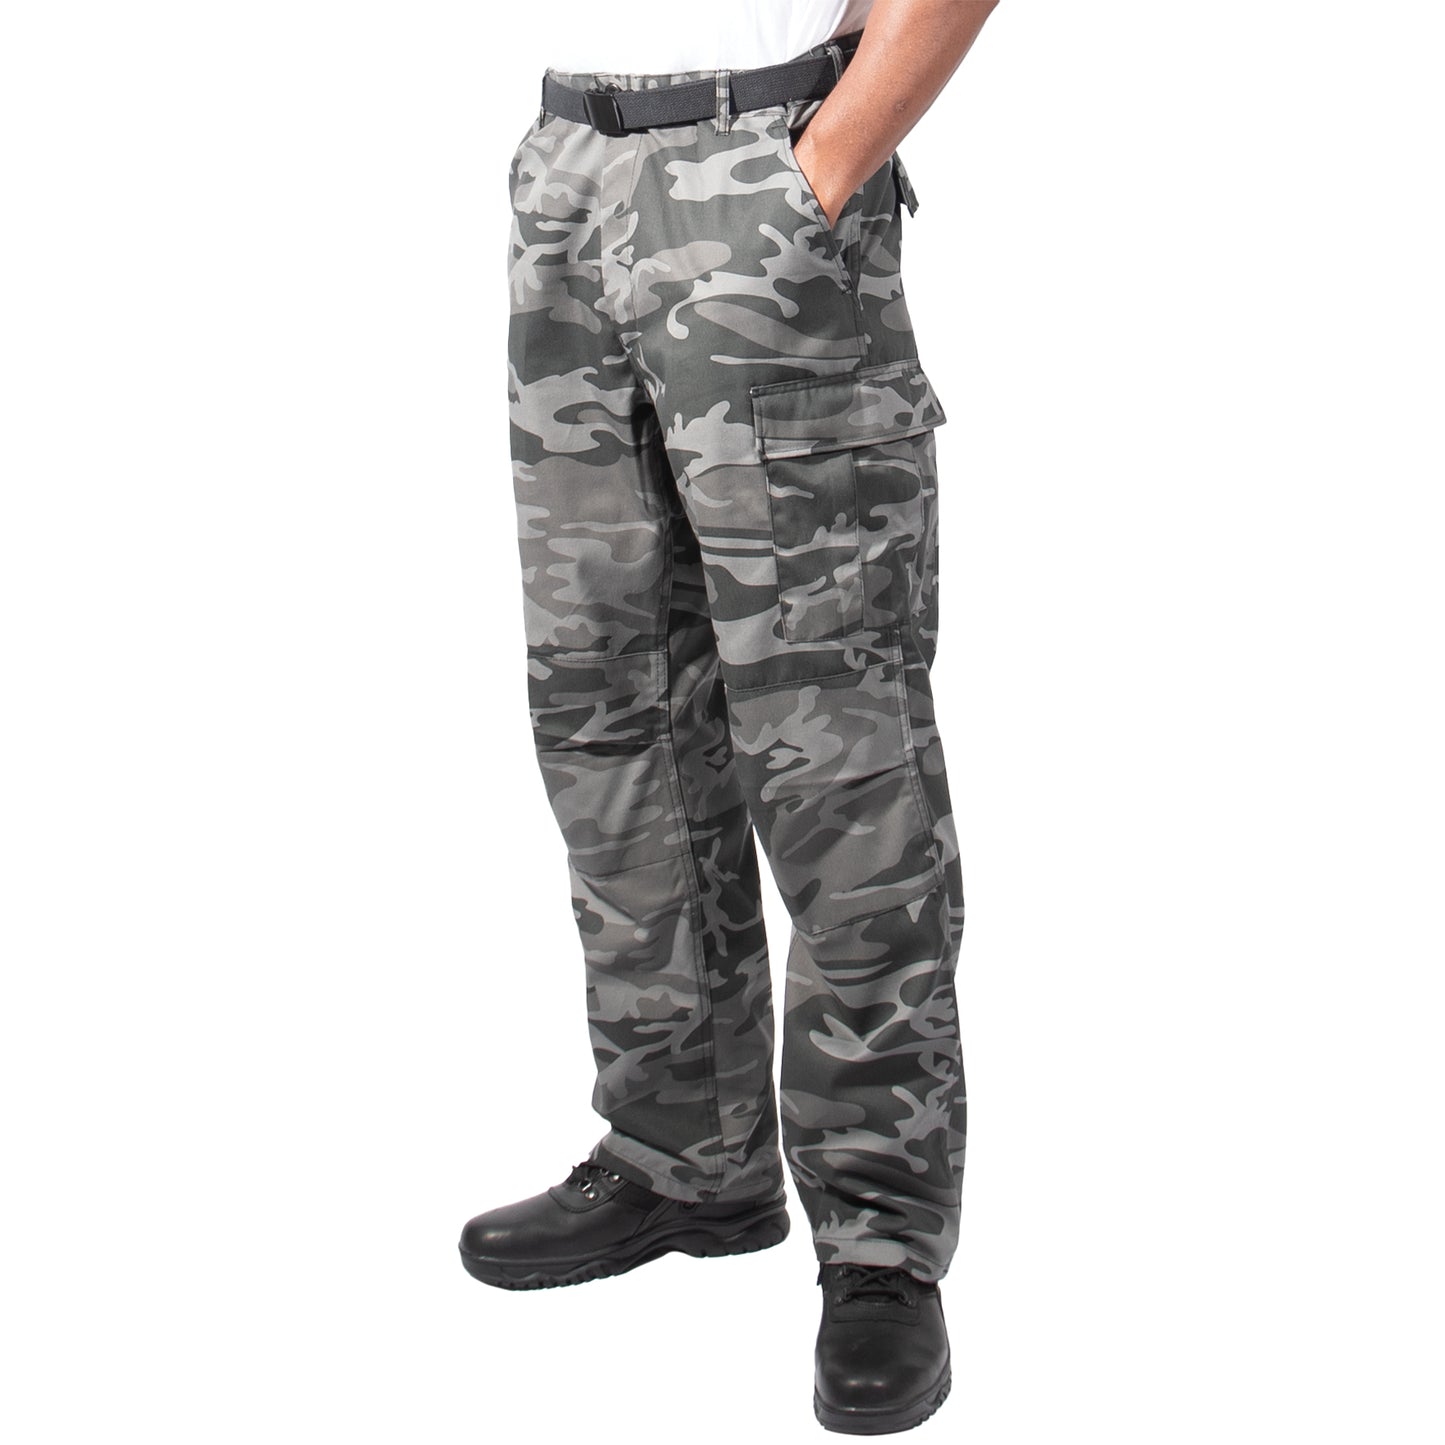 Rothco Relaxed Fit Zipper Fly BDU Pants - Black Camo